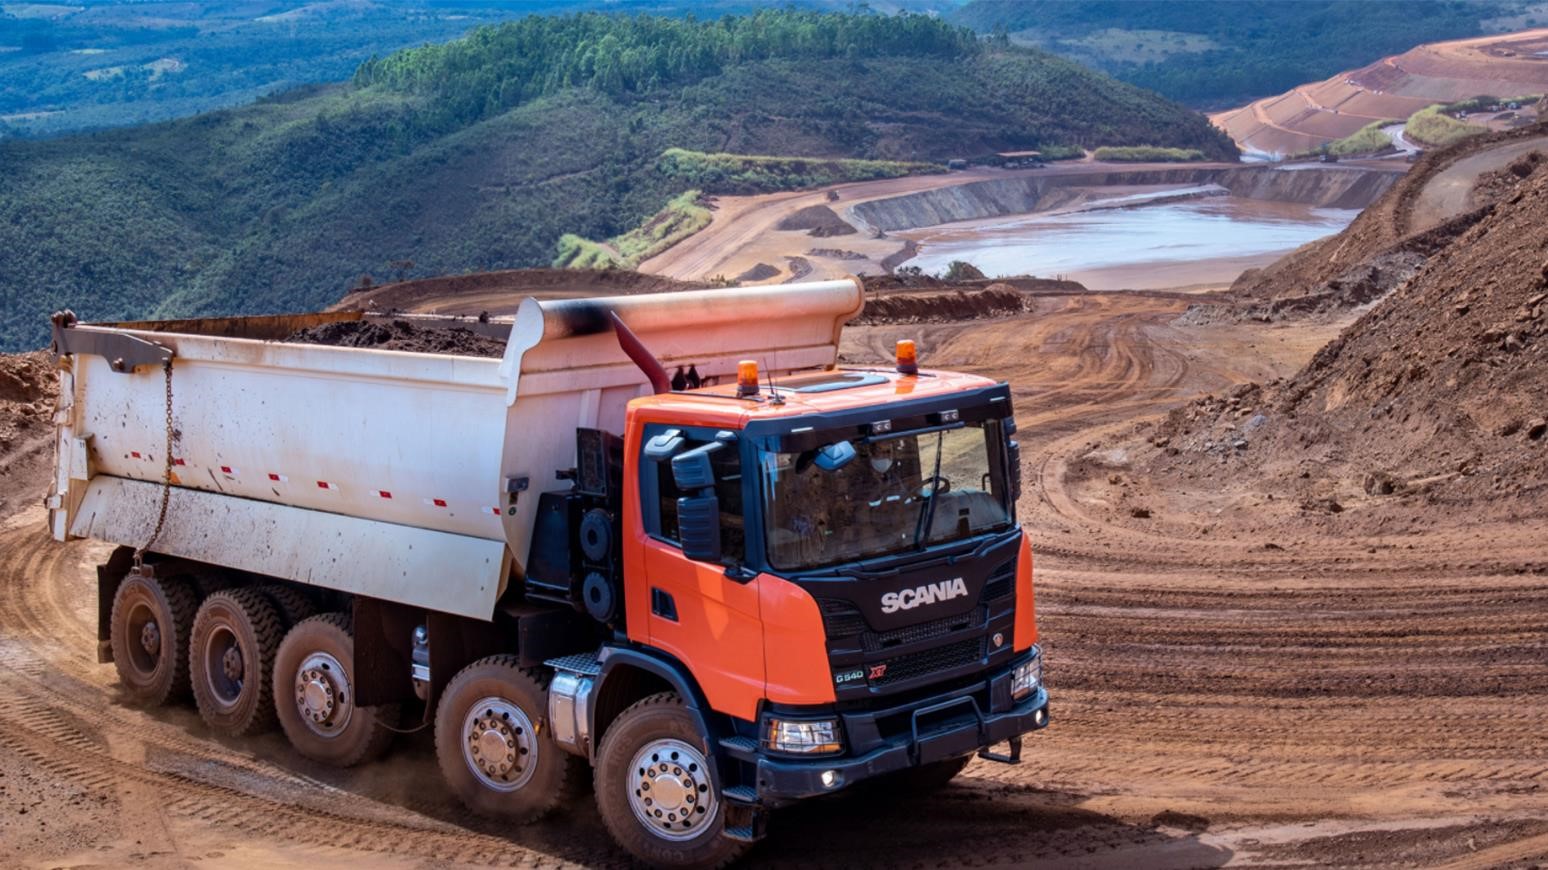 Scania Introduces The G 540 10x4/6 XT Heavy Tipper Truck, A 69-Tonne Mining & Construction Workhorse